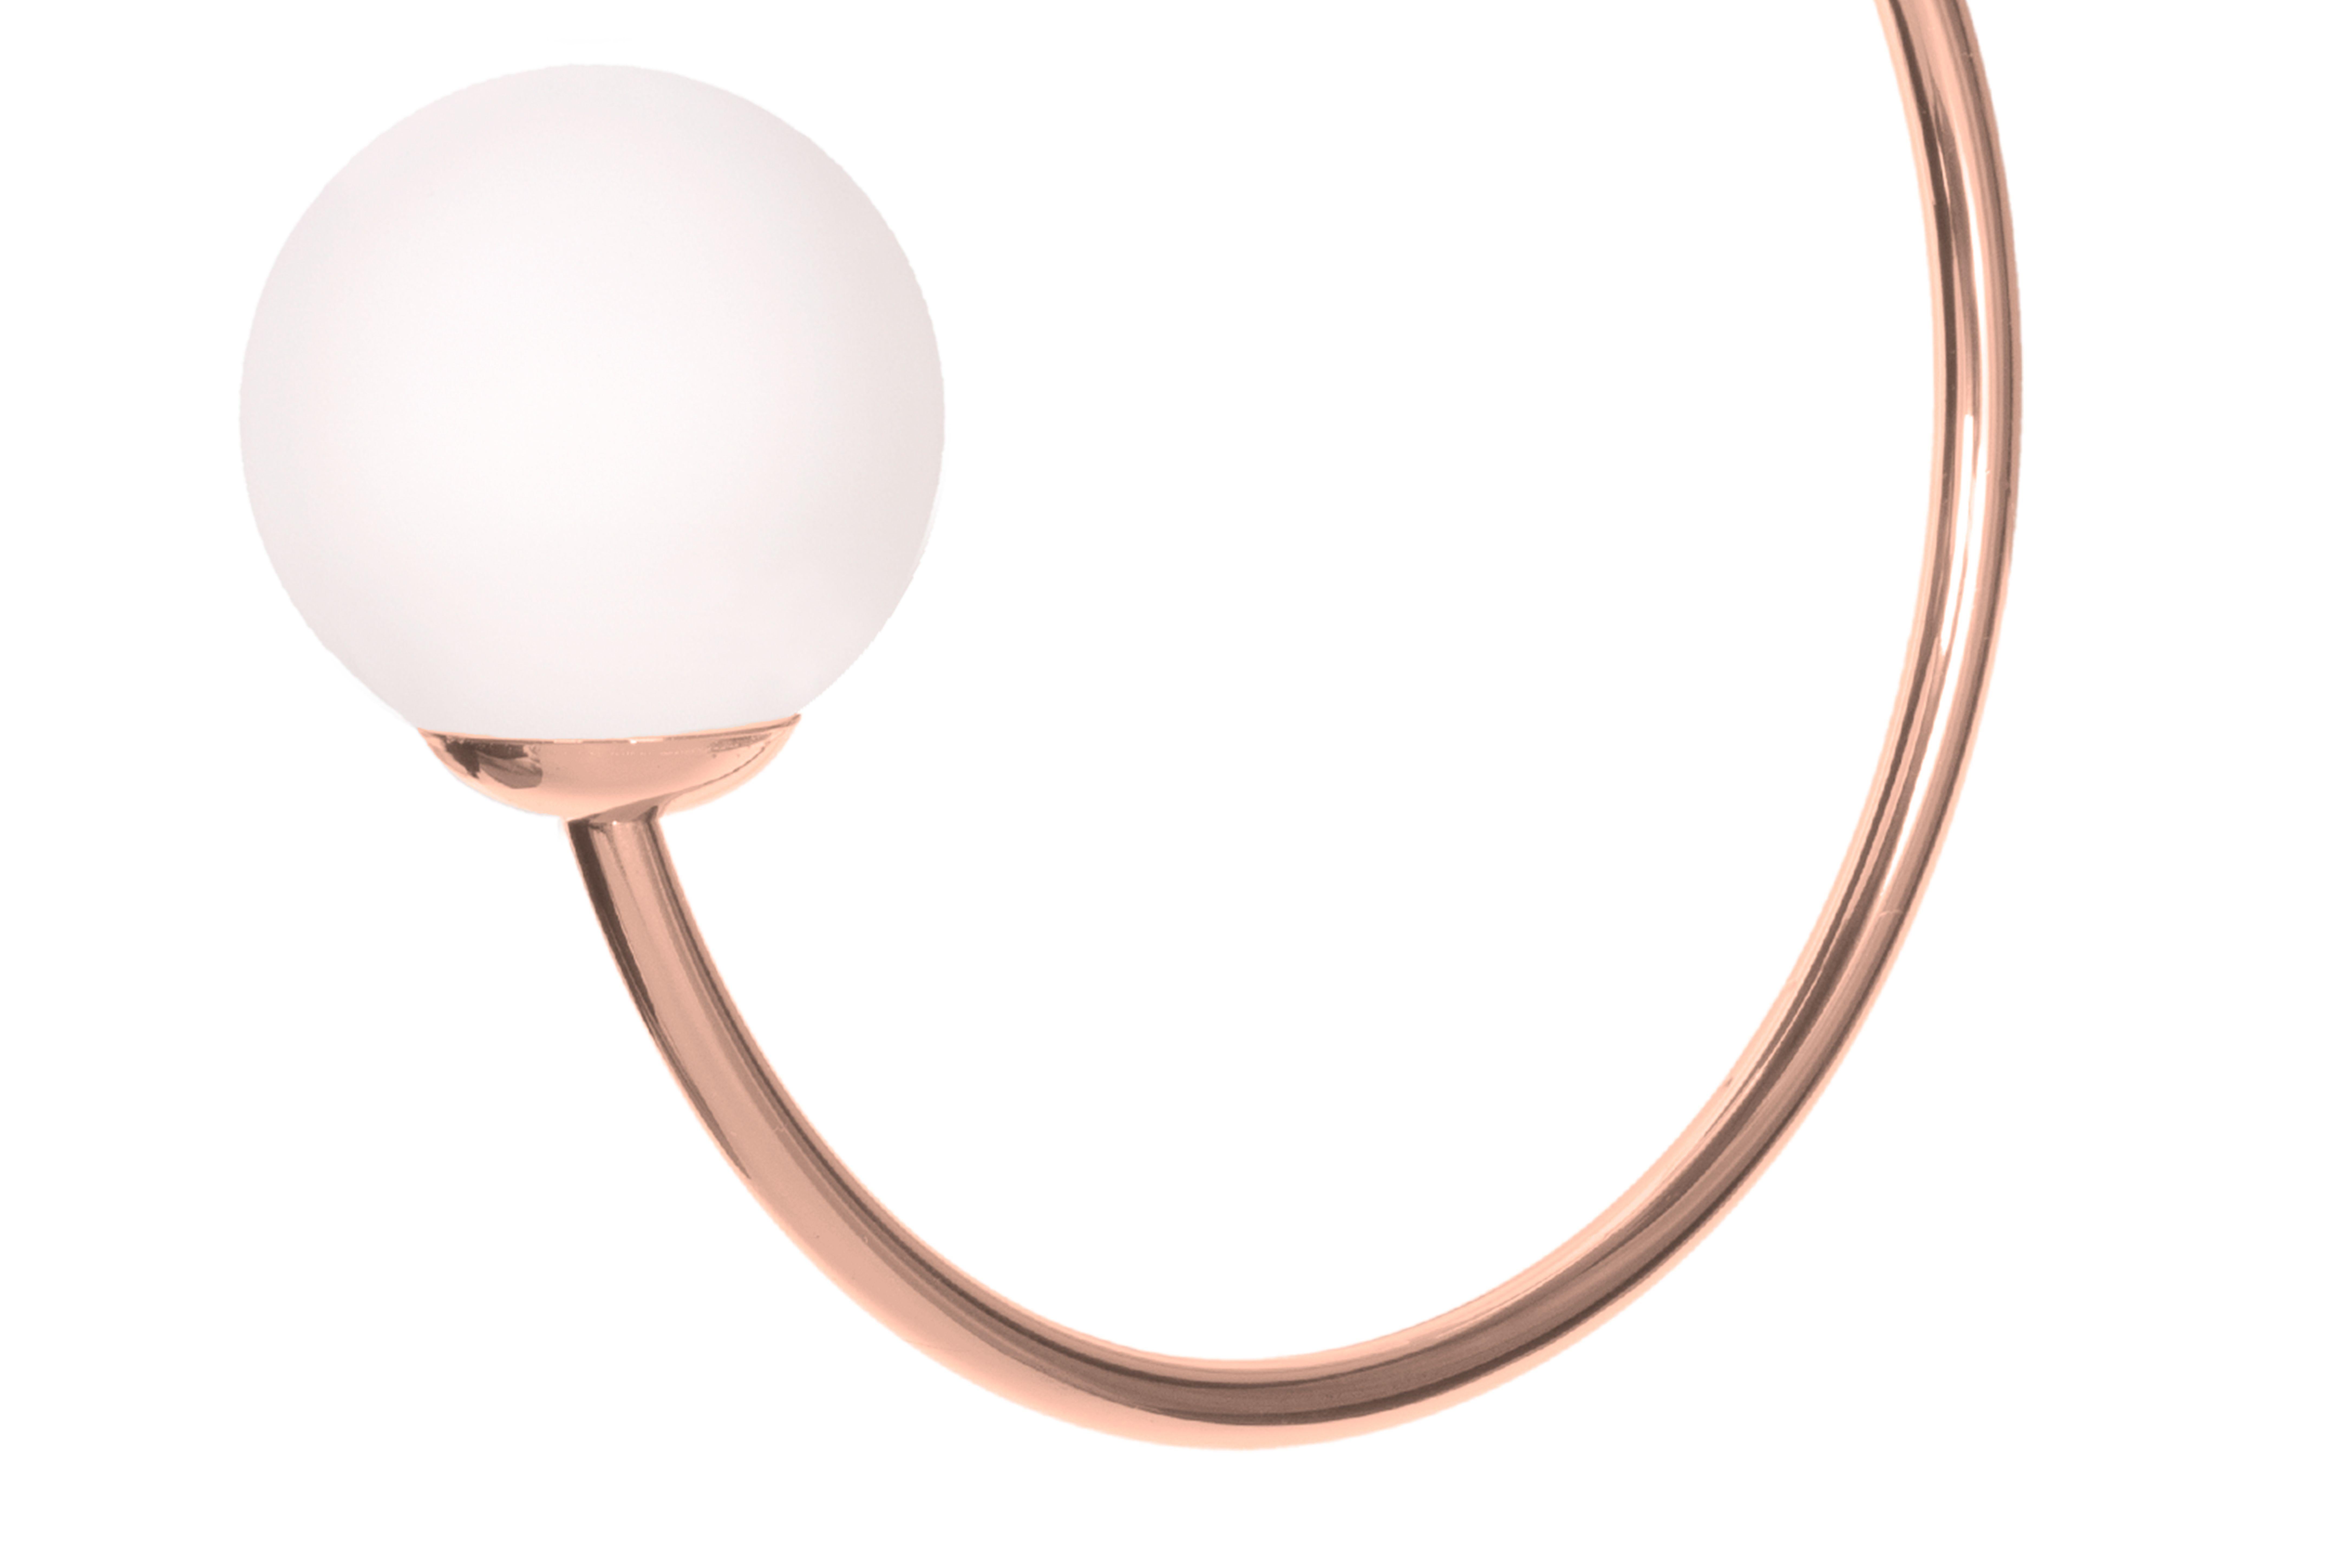 Gabriela copper ceiling lamp, Royal Stranger
Dimensions: W 36 x D 14 x H 114 cm
Materials: Body polished brass. Glass balls blown glass opal diffuser.


Inspired by the femininity and using bold and vibrant color schemes, this collection is